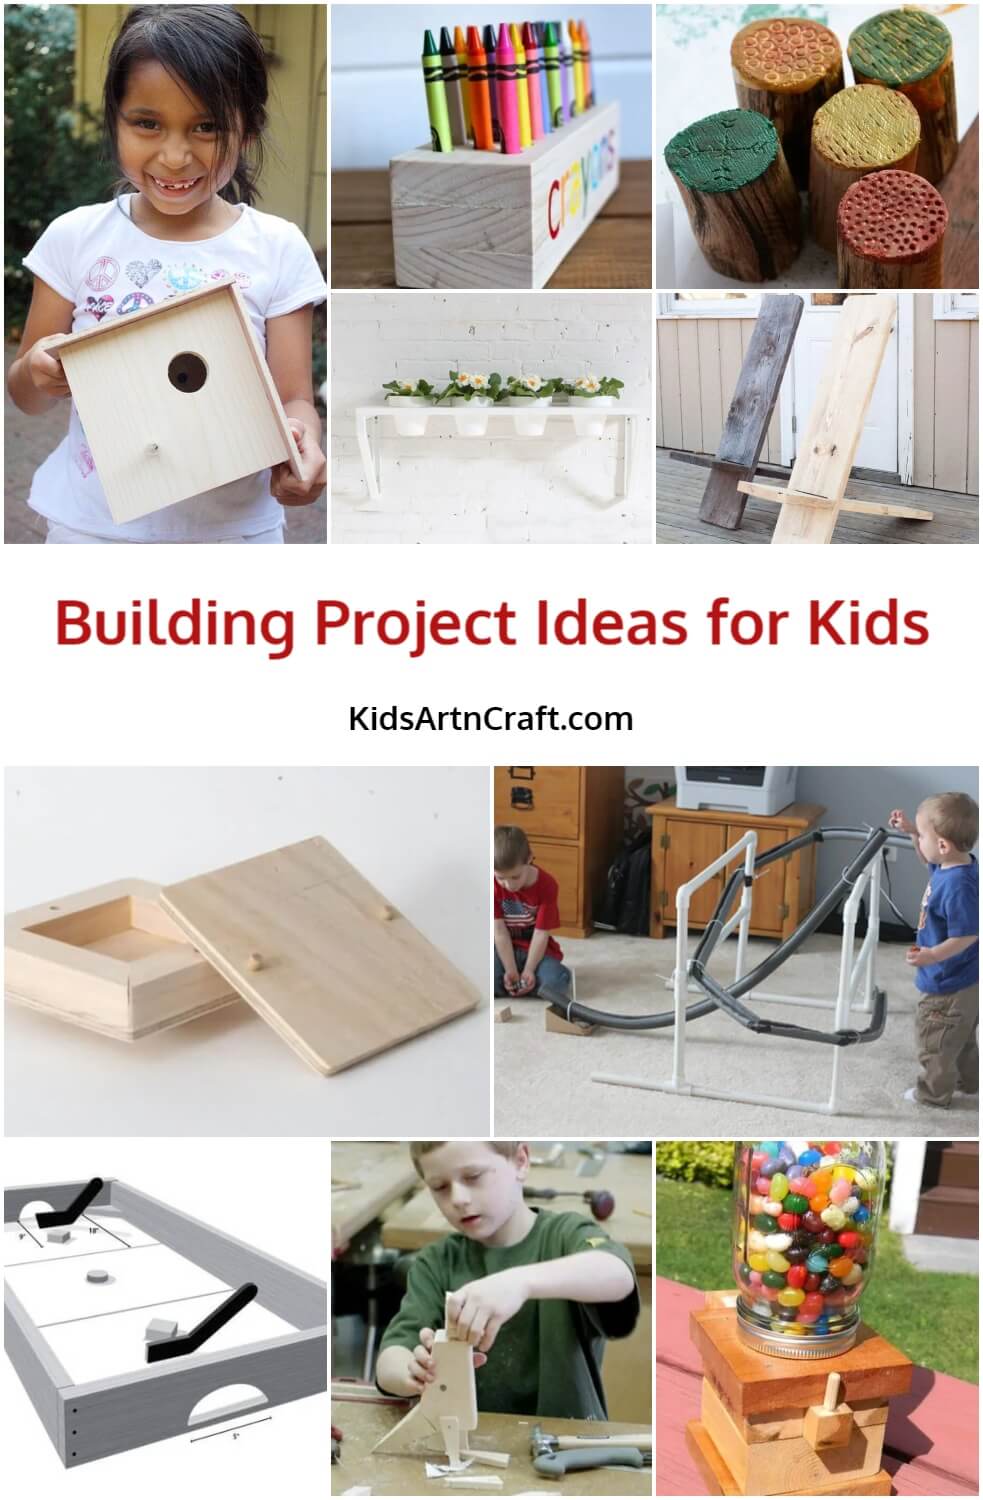 Building Project Ideas for Kids